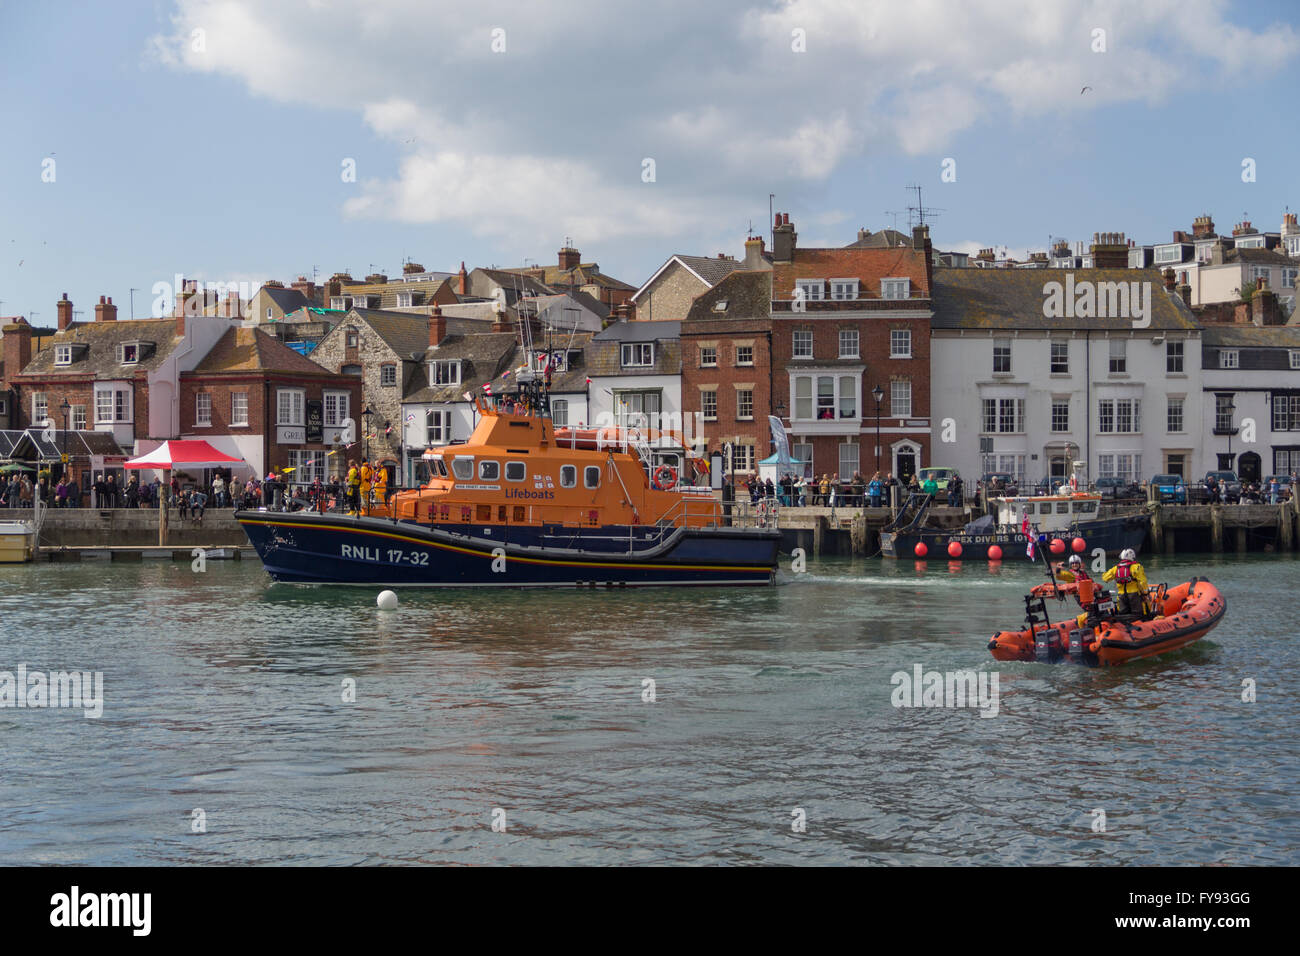 Weymouth, England. 23 April 2016. Queen's 90th Birthday Floating Tribute. RNLI Lifeboat & Dingh. Credit:  Frances Underwood/Alamy Live News Stock Photo